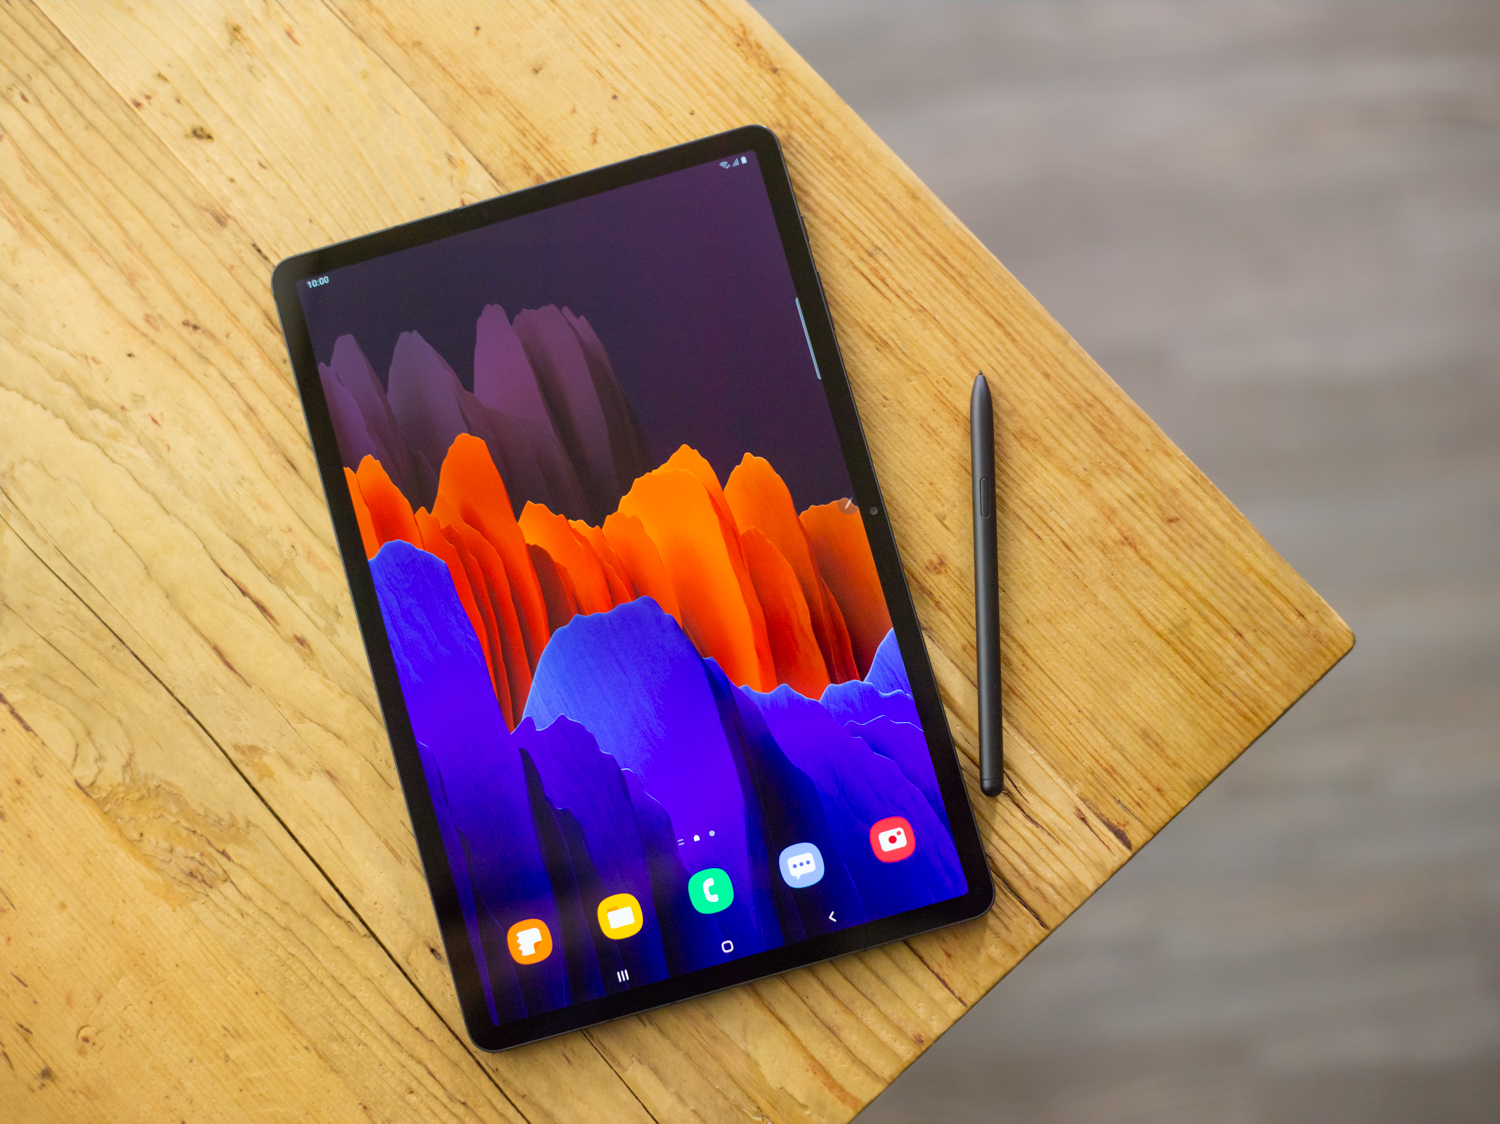 Galaxy Tab S7 Plus in Mystic Black with S Pen on a brown surface